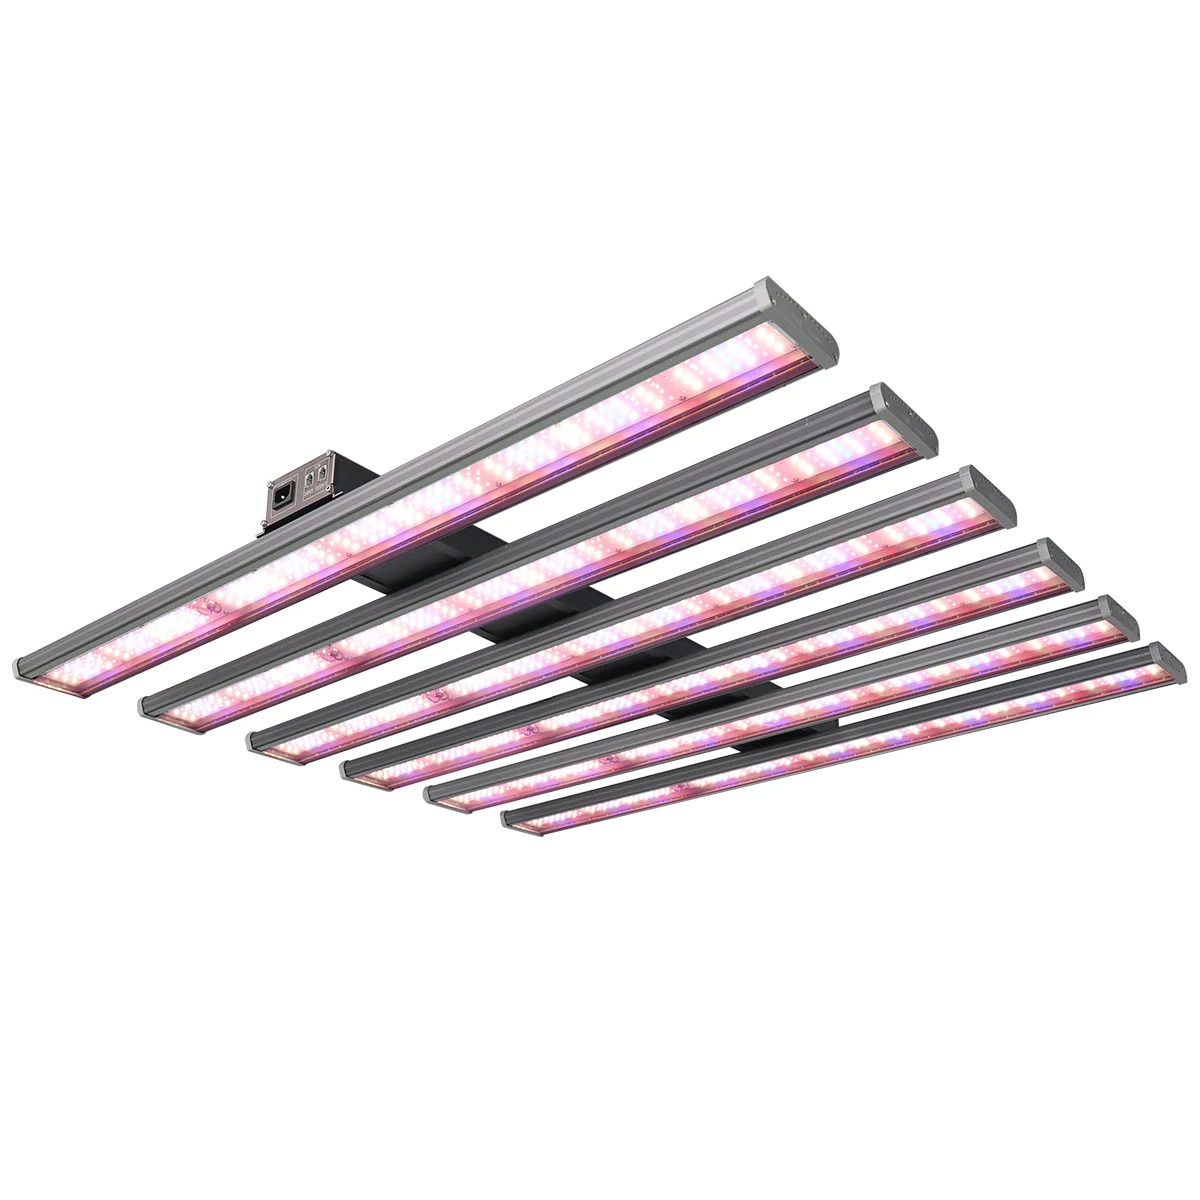 Walmart Full Spectrum 600W LED Grow Lamp Replacement 720W Full Cycle Indoor LED Grow Light For Flowering